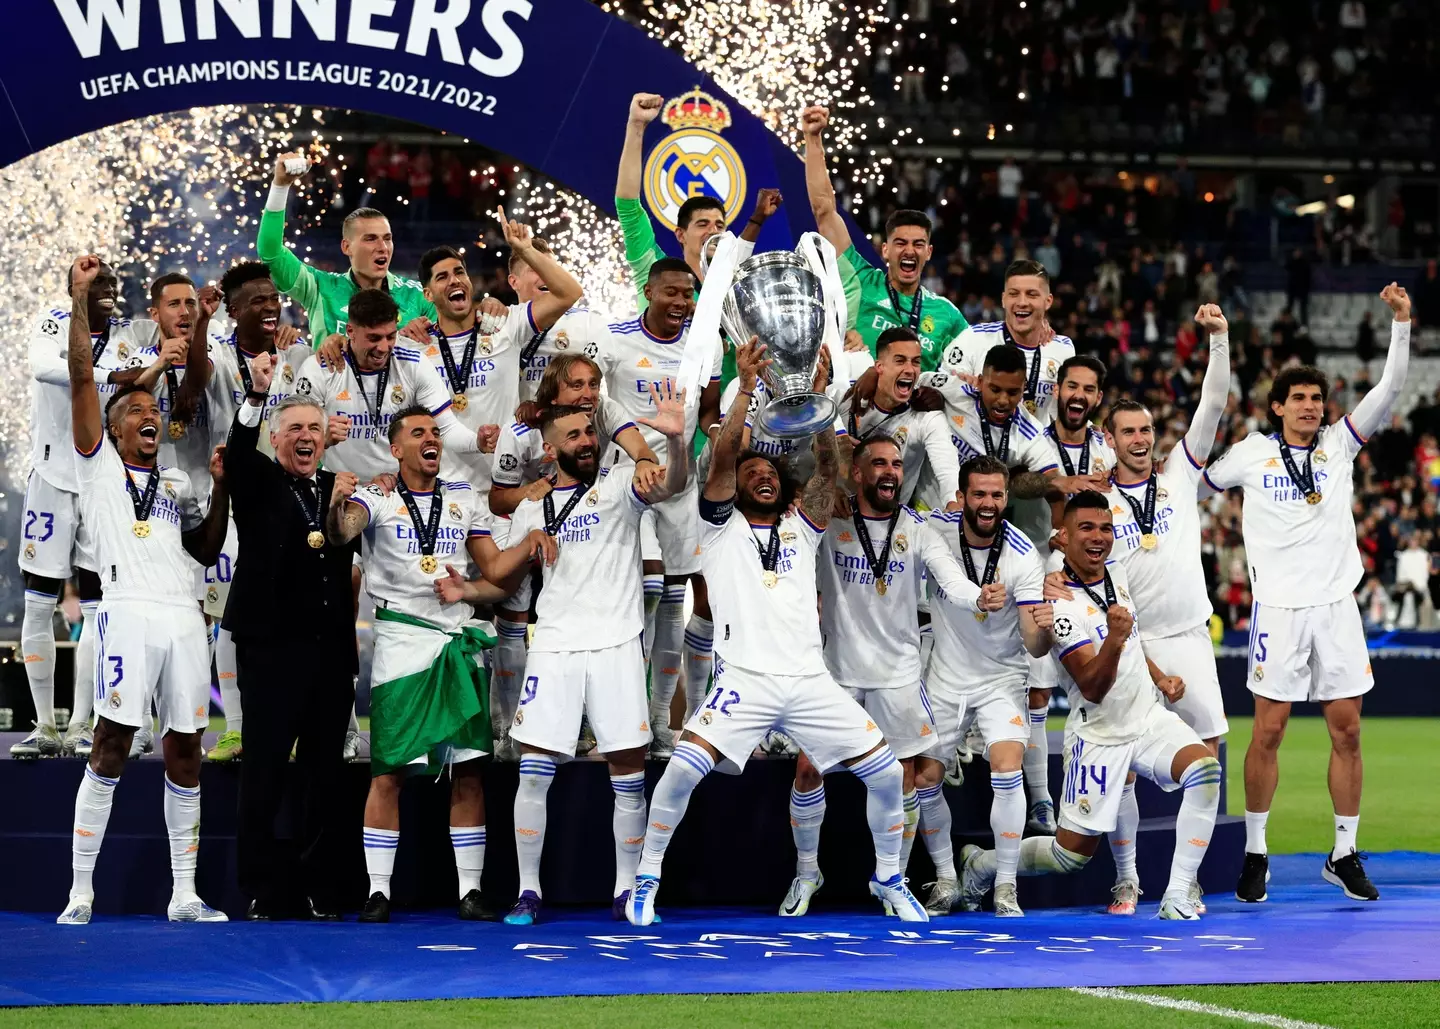 Real Madrid beat Liverpool 1-0 in the Champions League final (Image: PA)